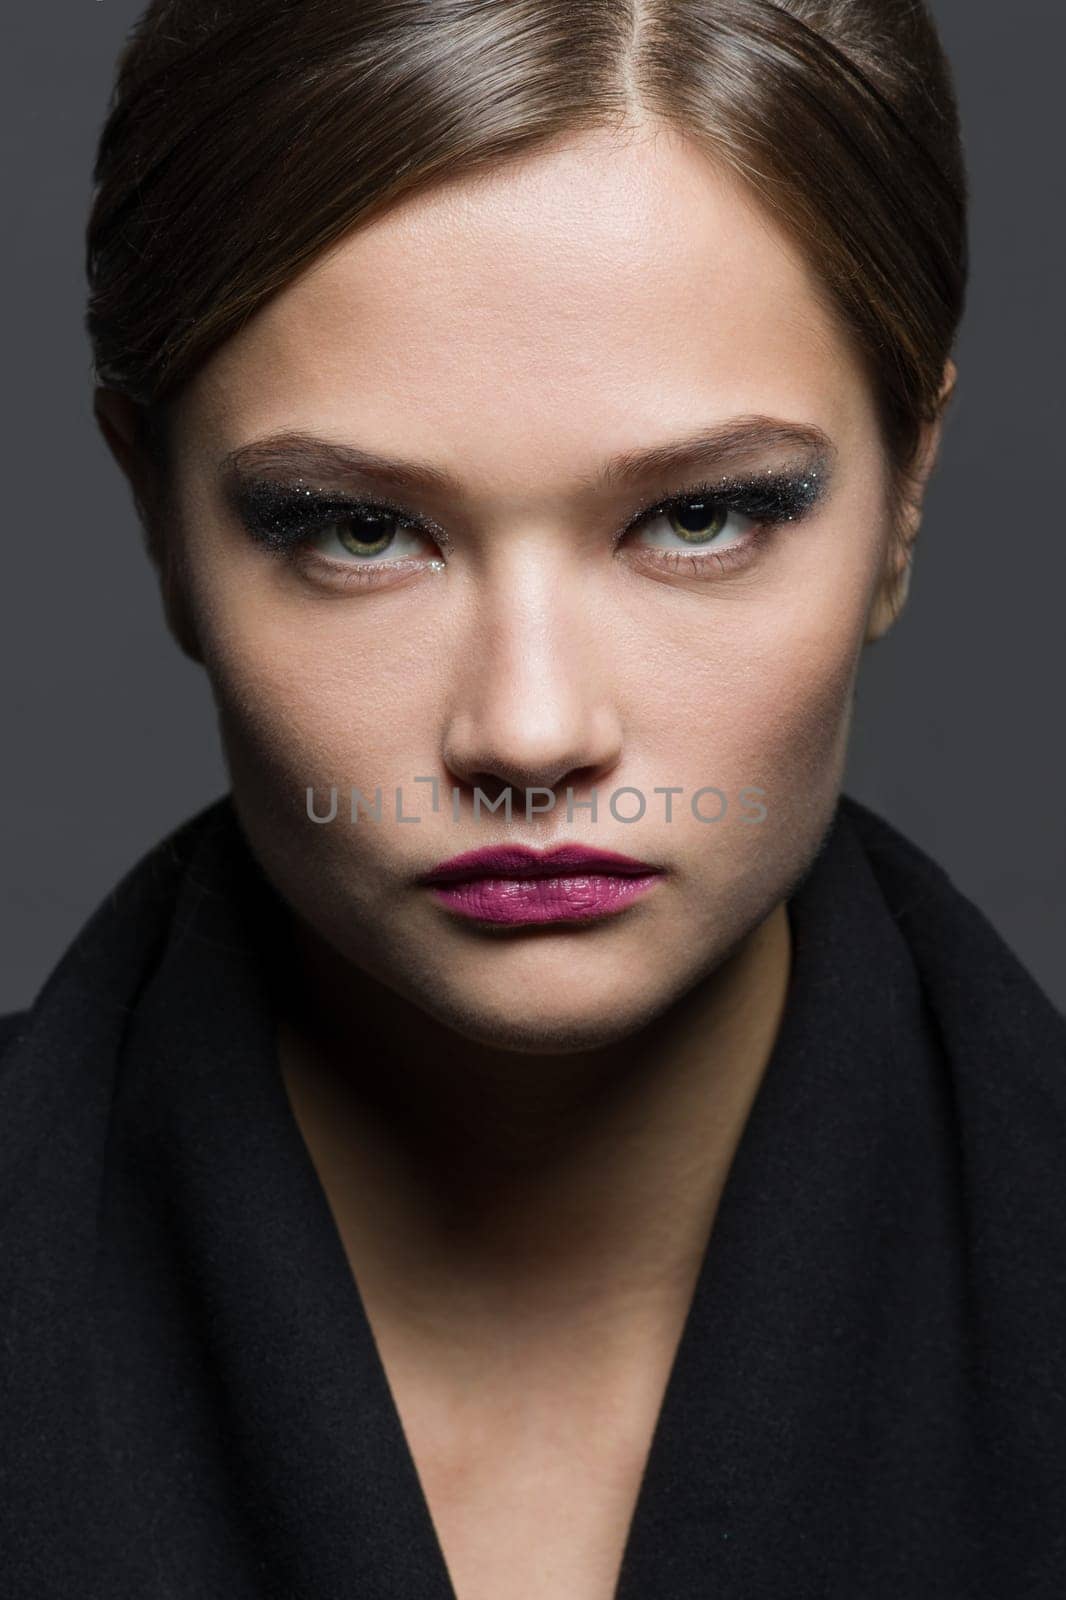 Beauty headshot portrait of a fashionable young woman with glamorous makeup and hairstyle, on a gray studio background